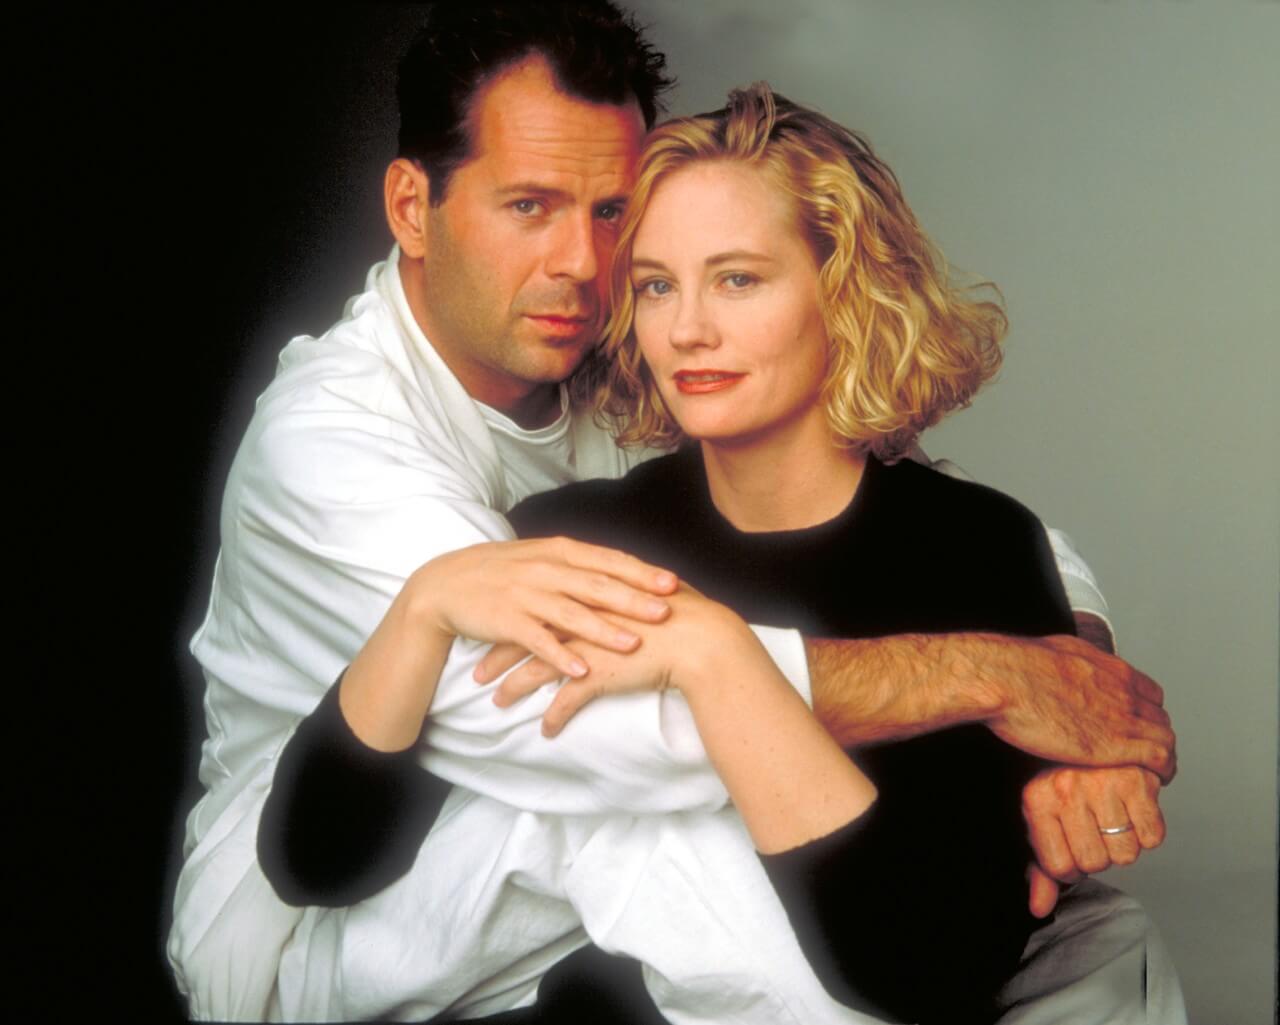 Bruce Willis and Cybill Shepherd as David Addison and Maddie Hayes on 'Moonlighting.'